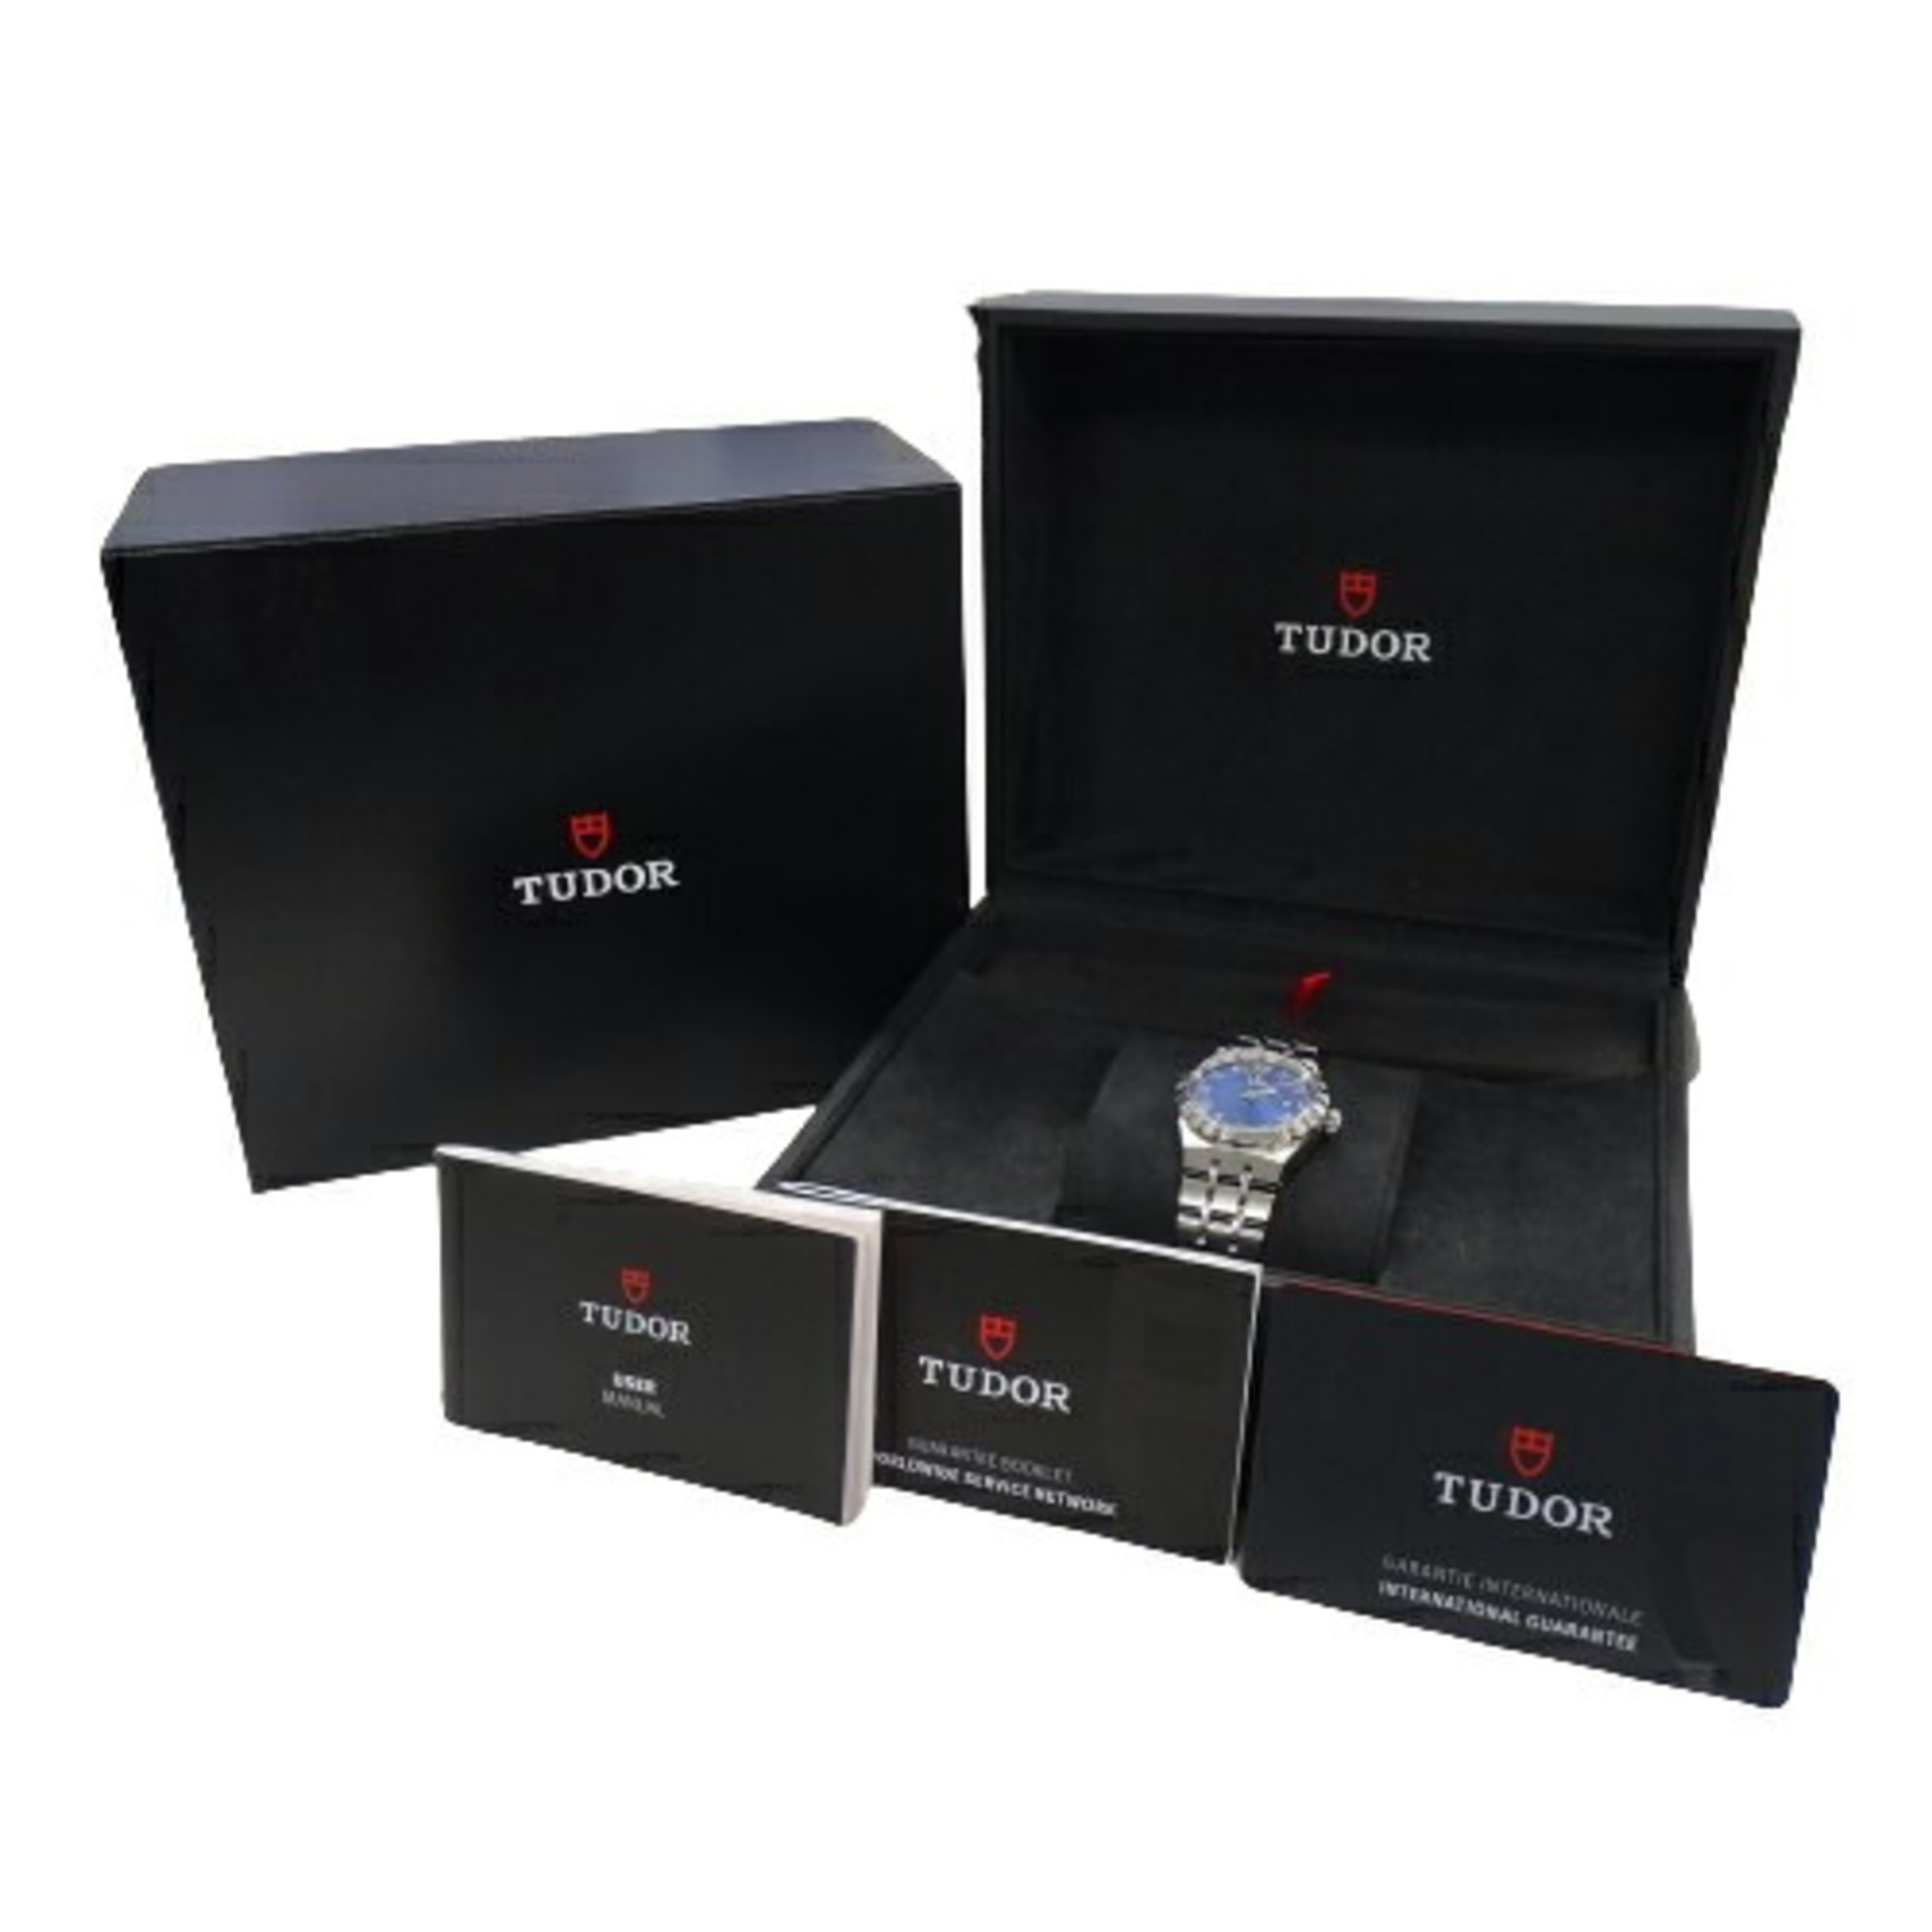 Tudor Royal 28300 Watch for Women, Date, Automatic, AT, Stainless Steel, SS, Silver, Blue, Round